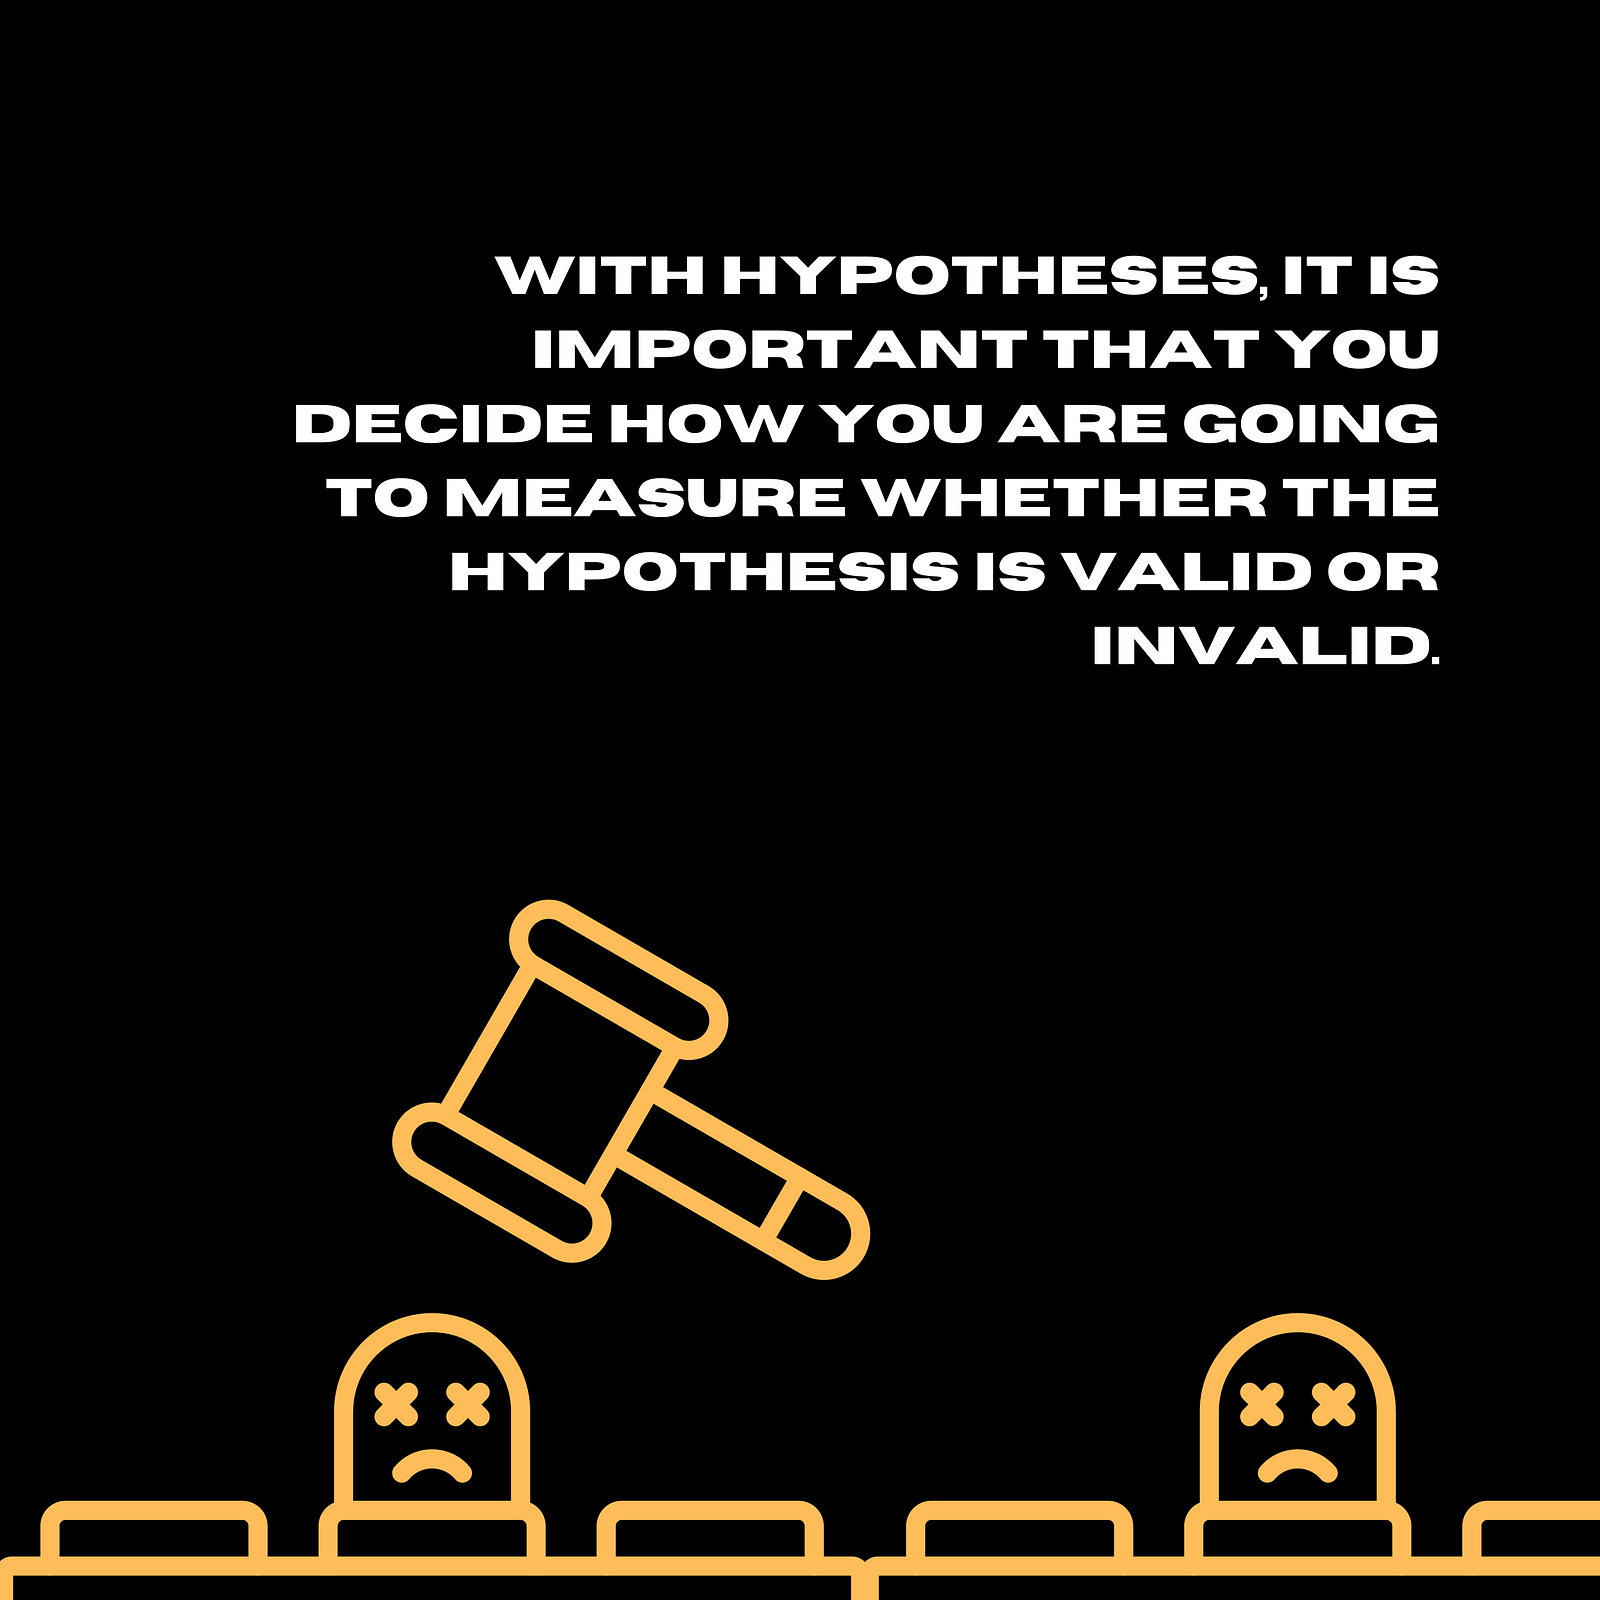 With hypotheses, it is important that you decide how you are going to measure whether the hypothesis is valid or invalid.